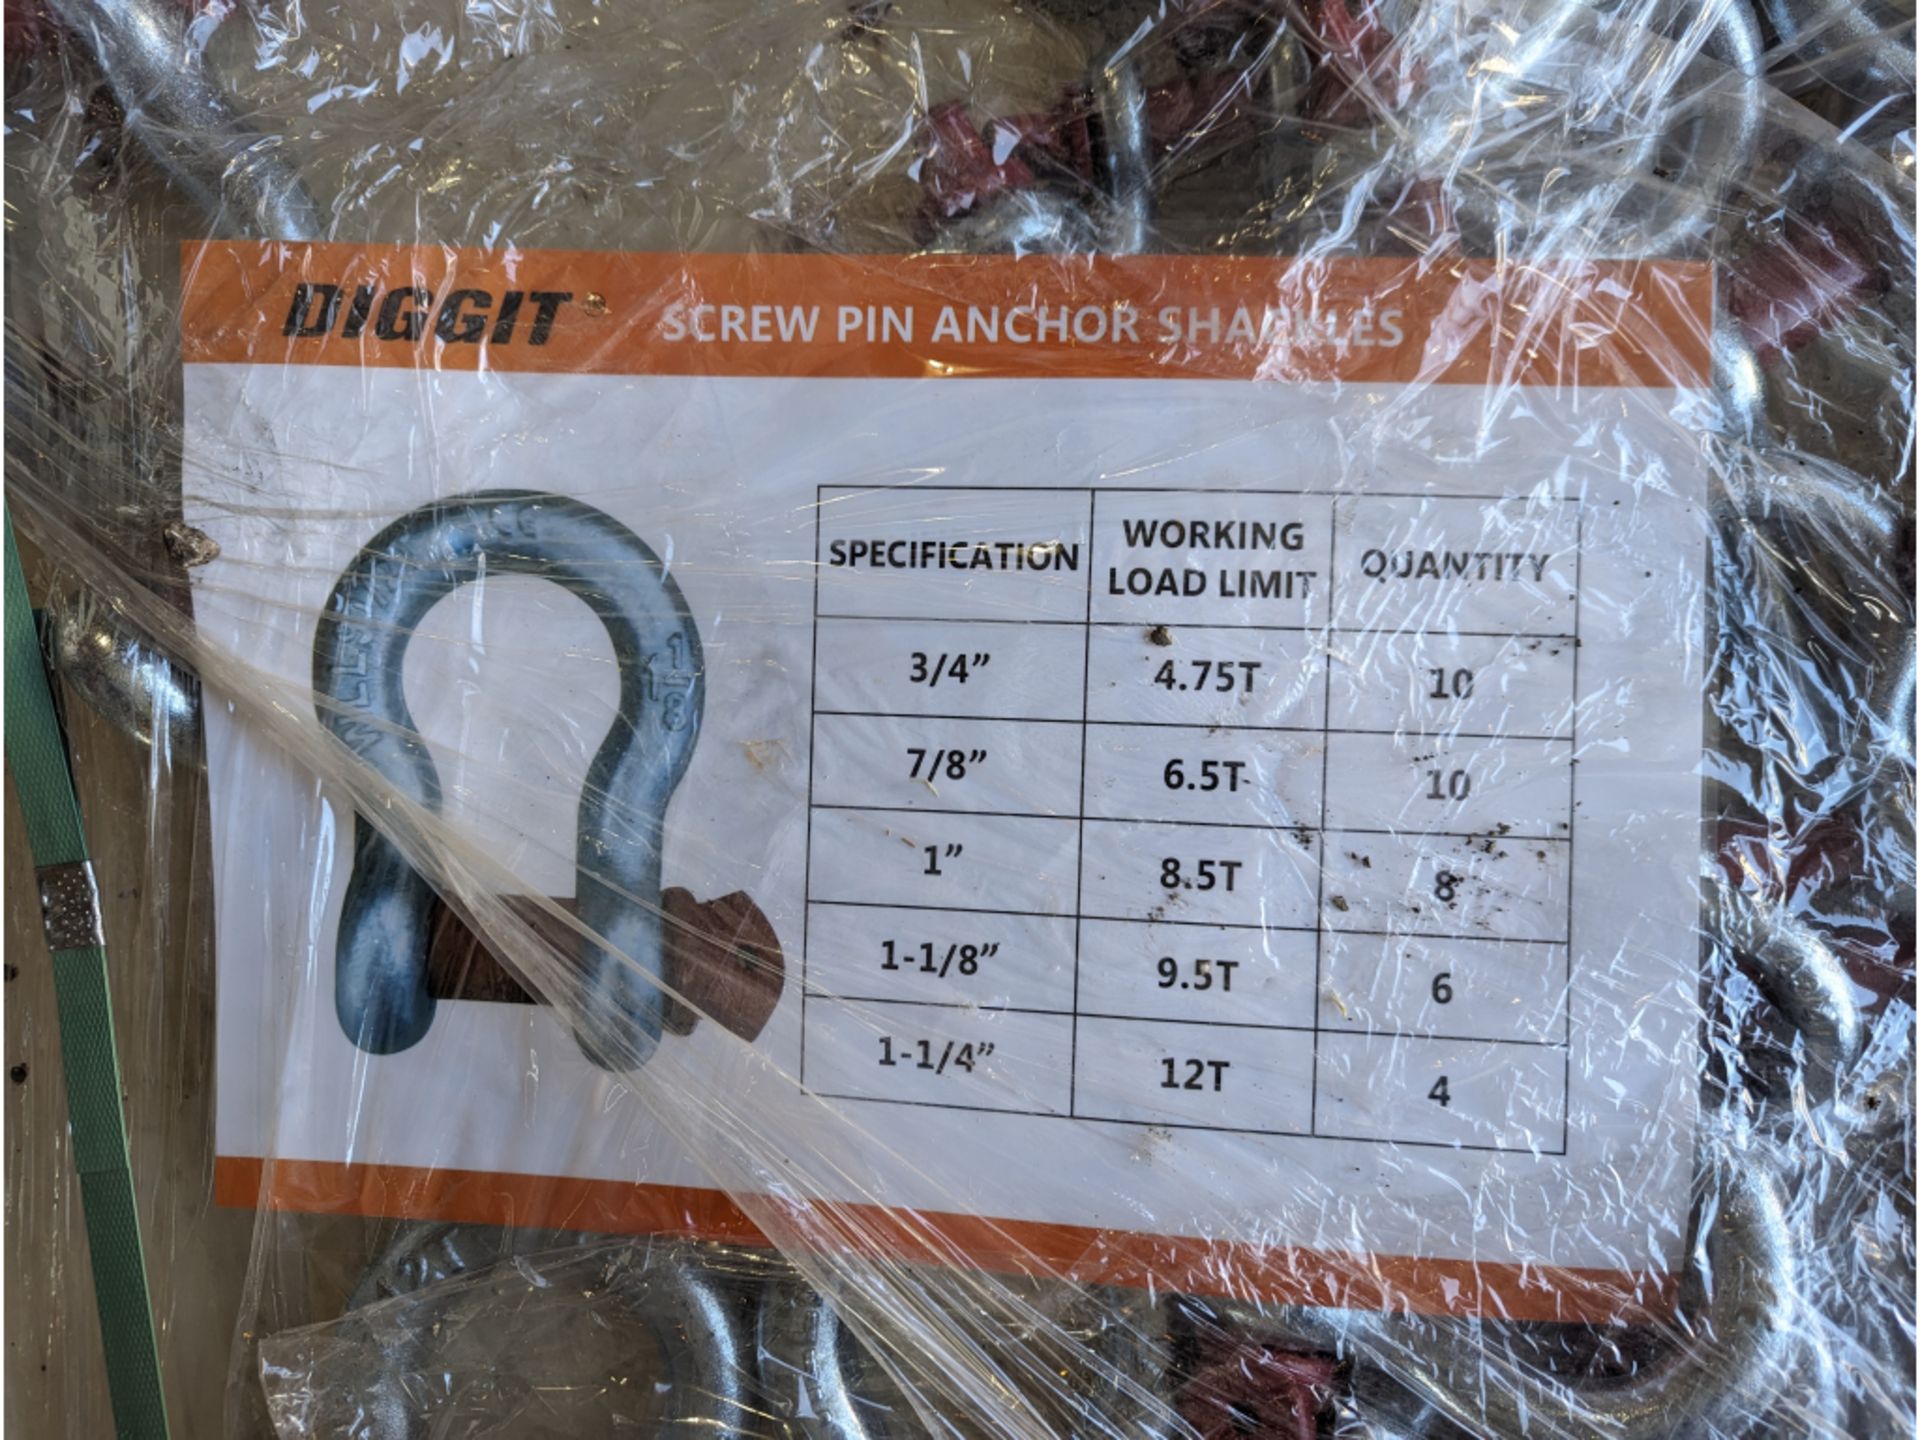 38 Screw Pin Anchor Shackles - Image 2 of 2